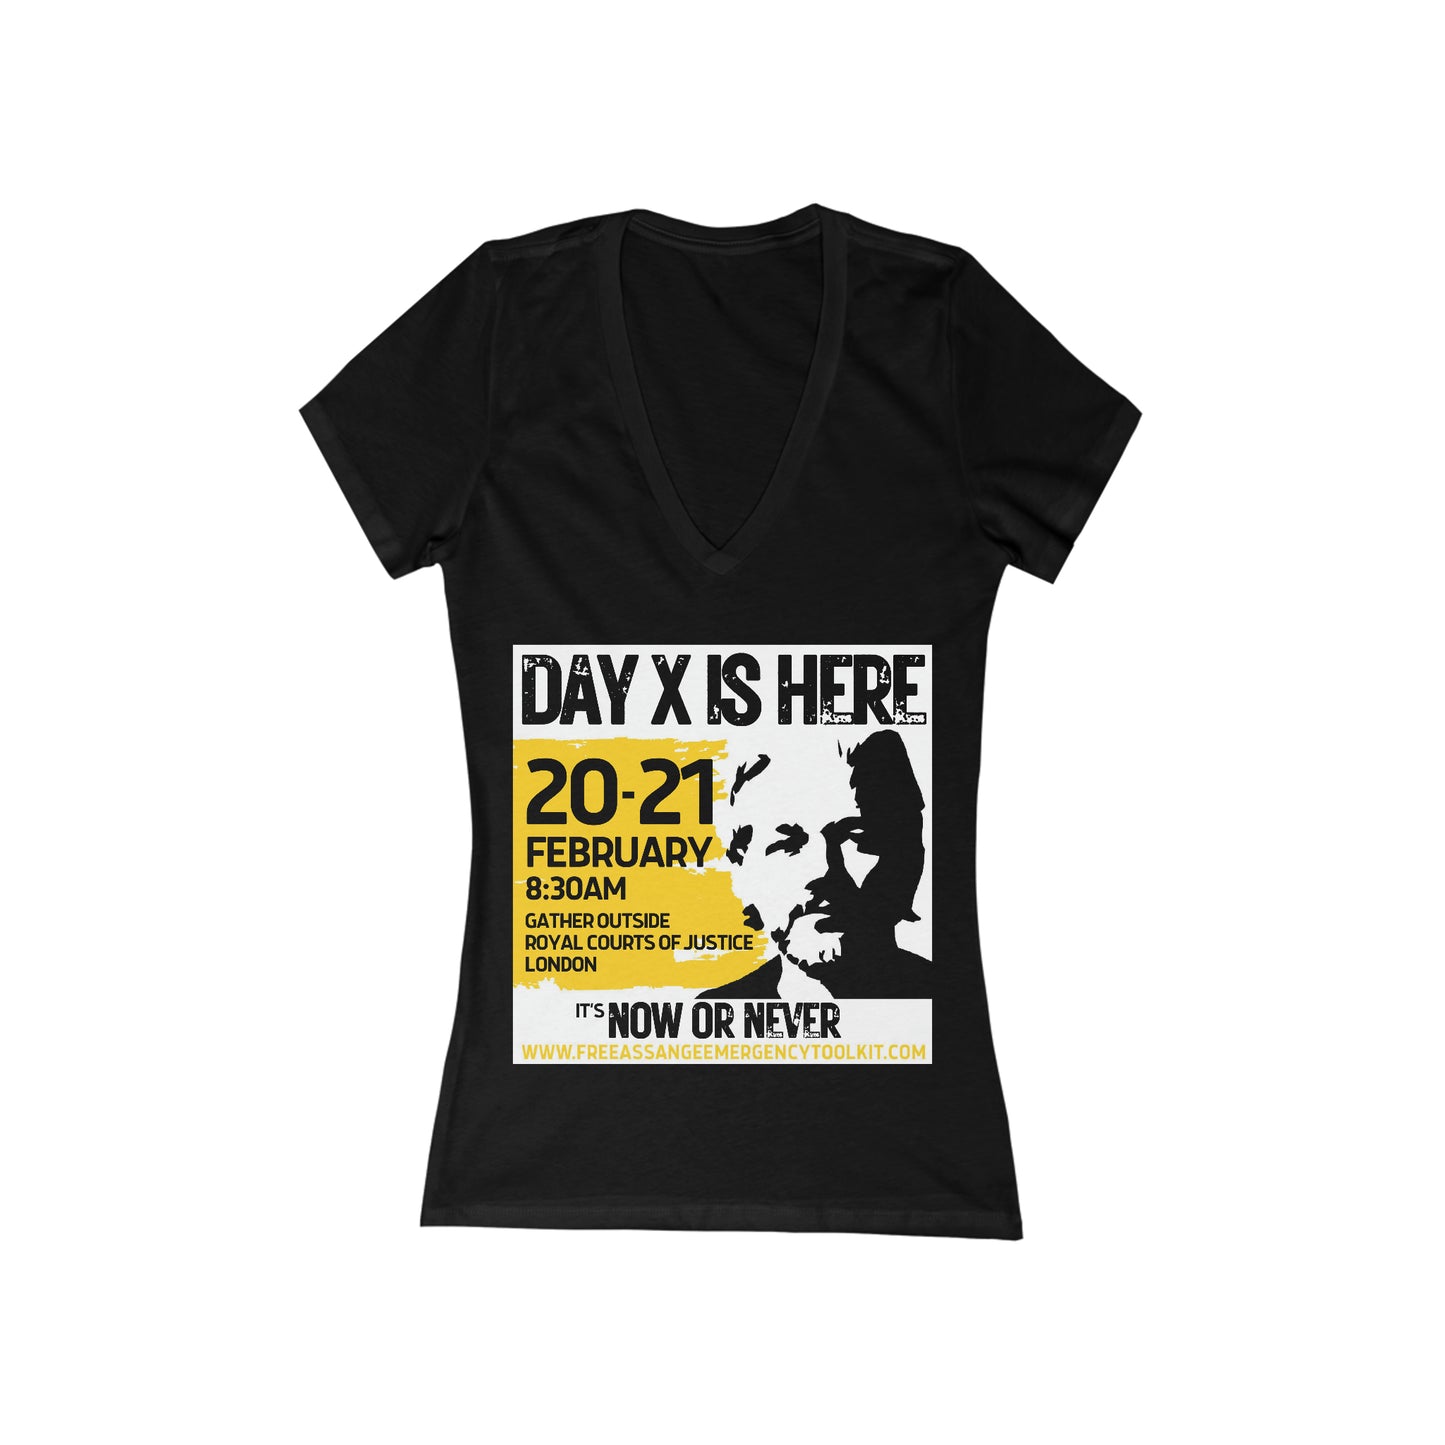 (US Printer) Day X is Here Women's Jersey Short Sleeve Deep V-Neck Tee